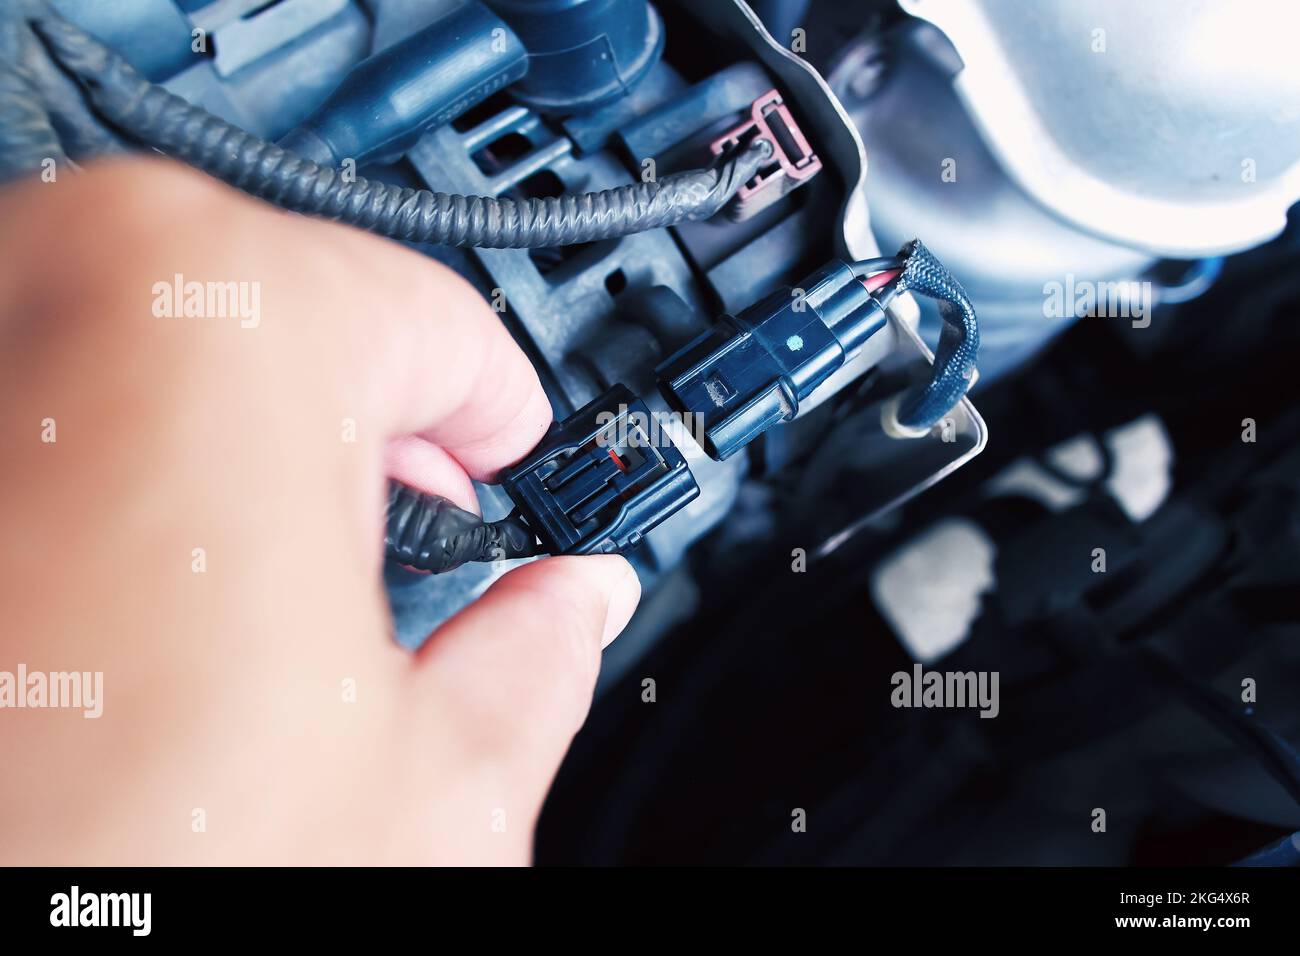 Technician inserting the alternator or generator plug of the car in the engine compartment, automotive parts concept Stock Photo